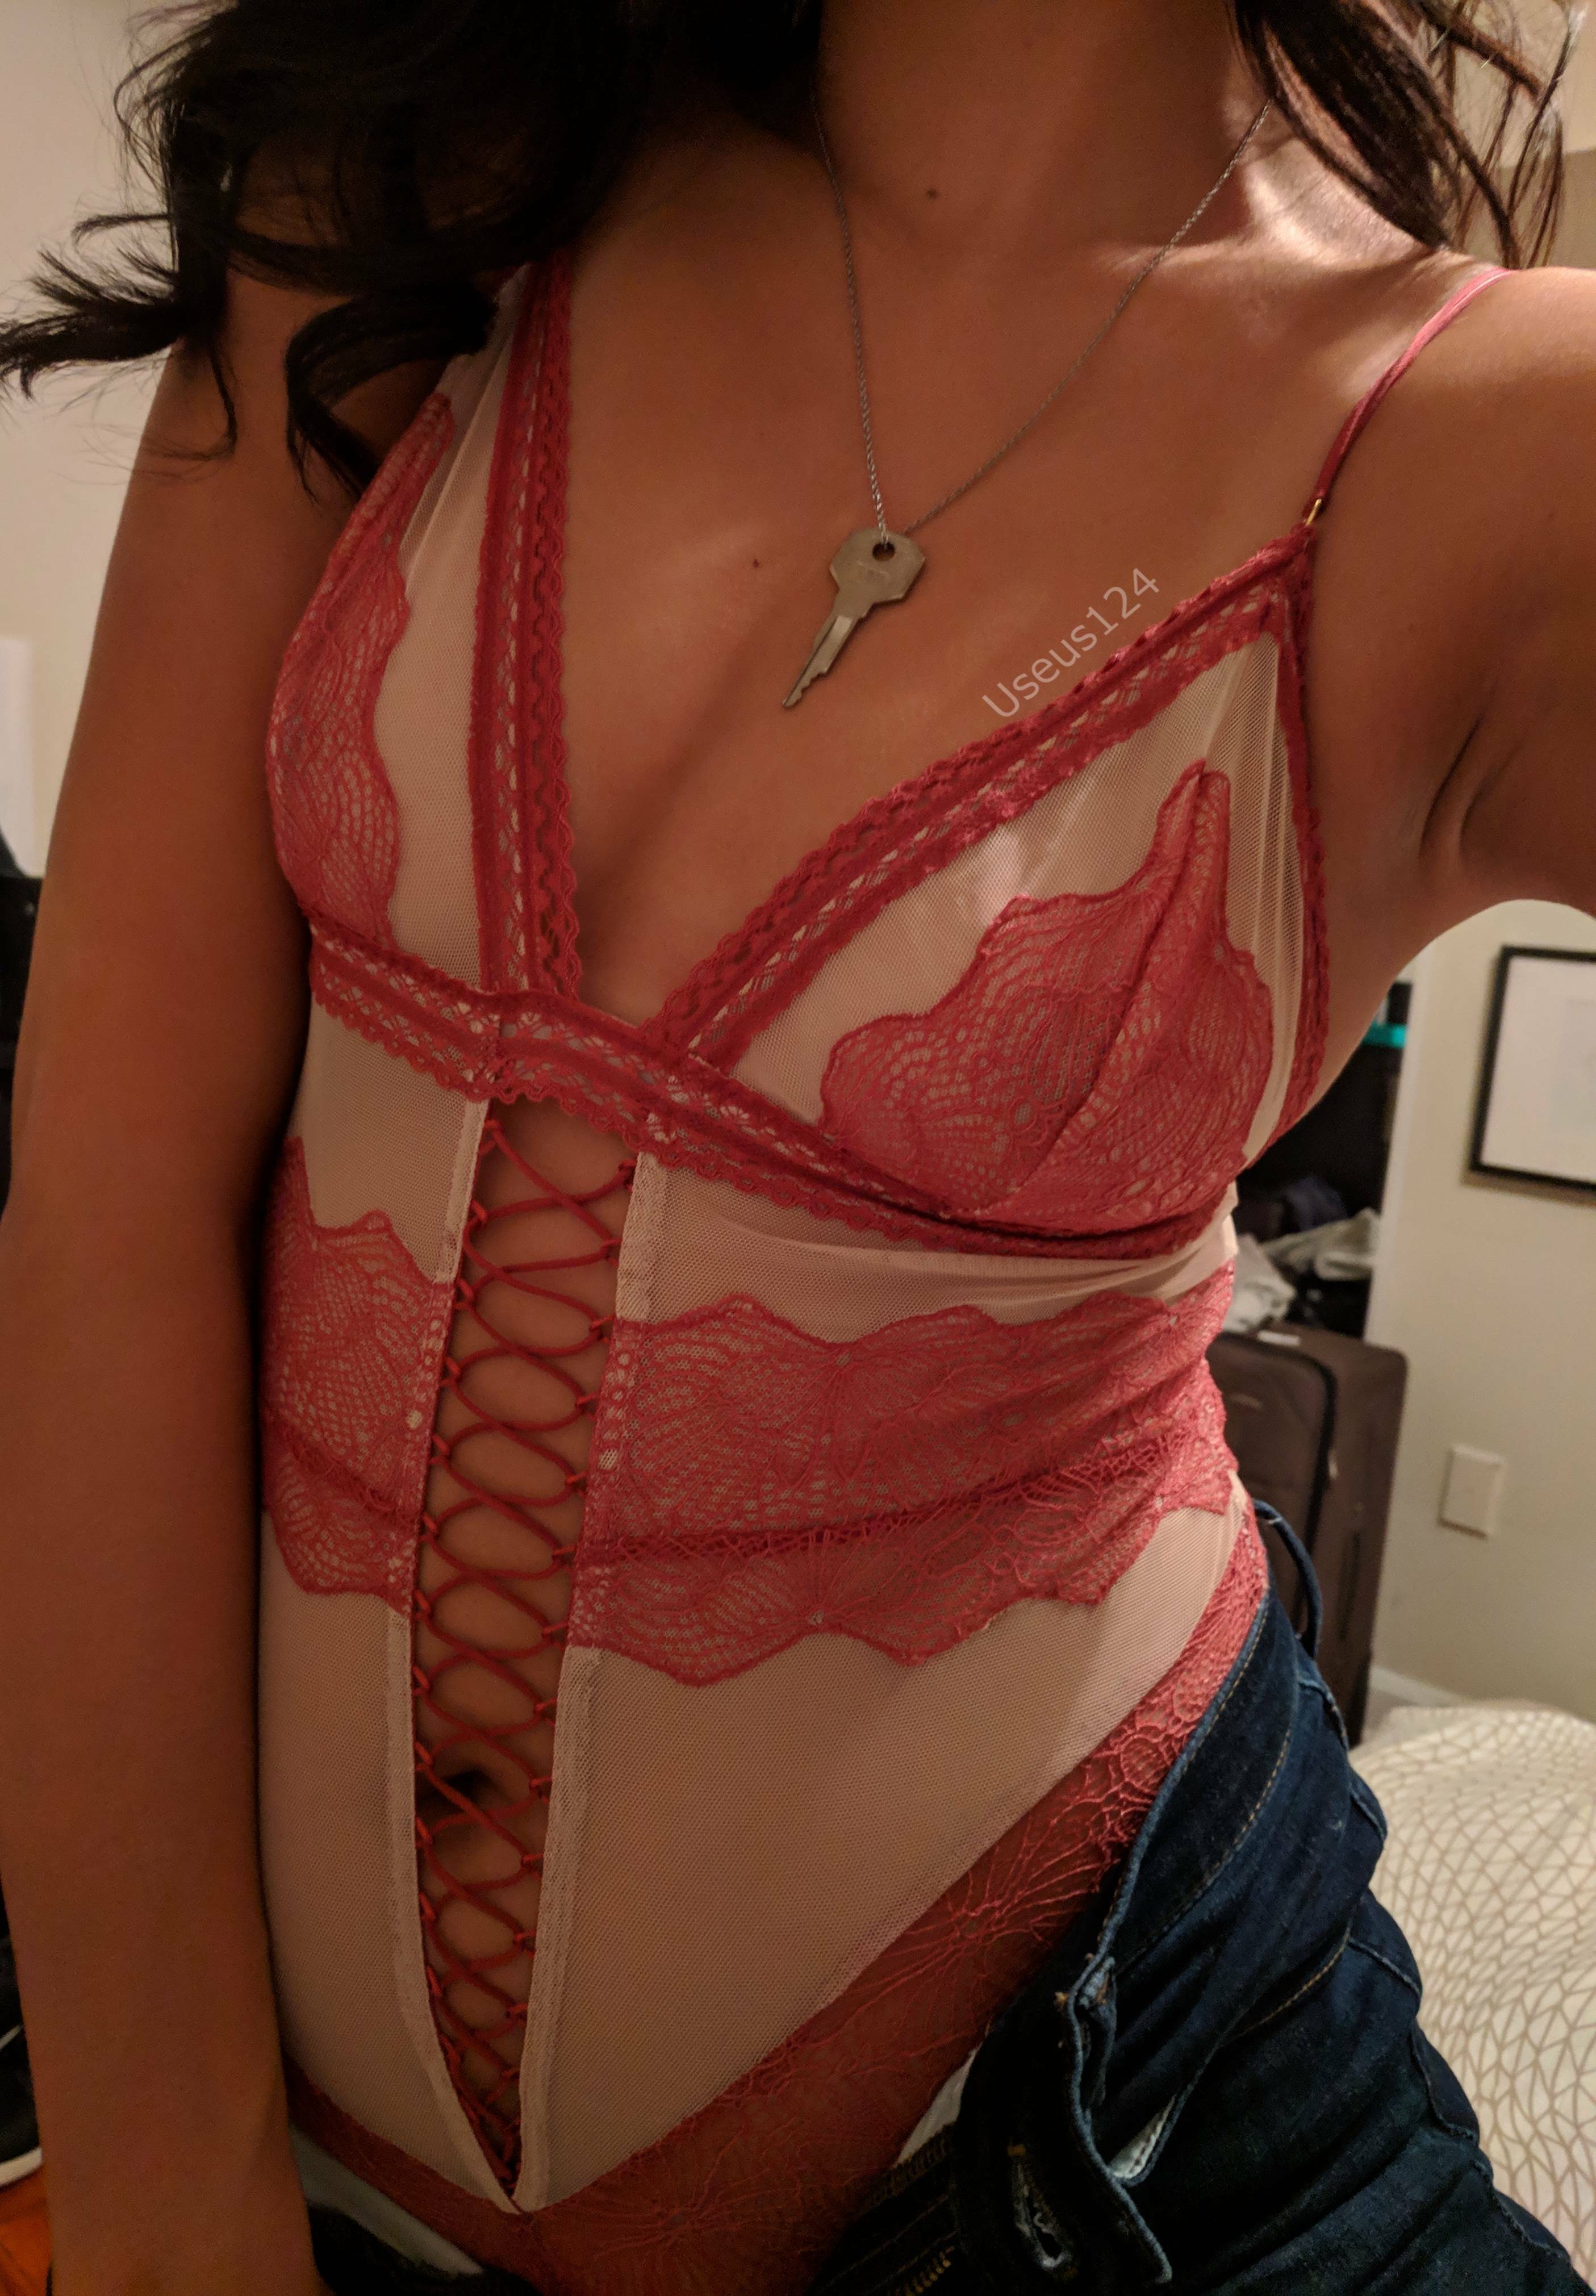 Cuck picked my outfit for my booty call pic